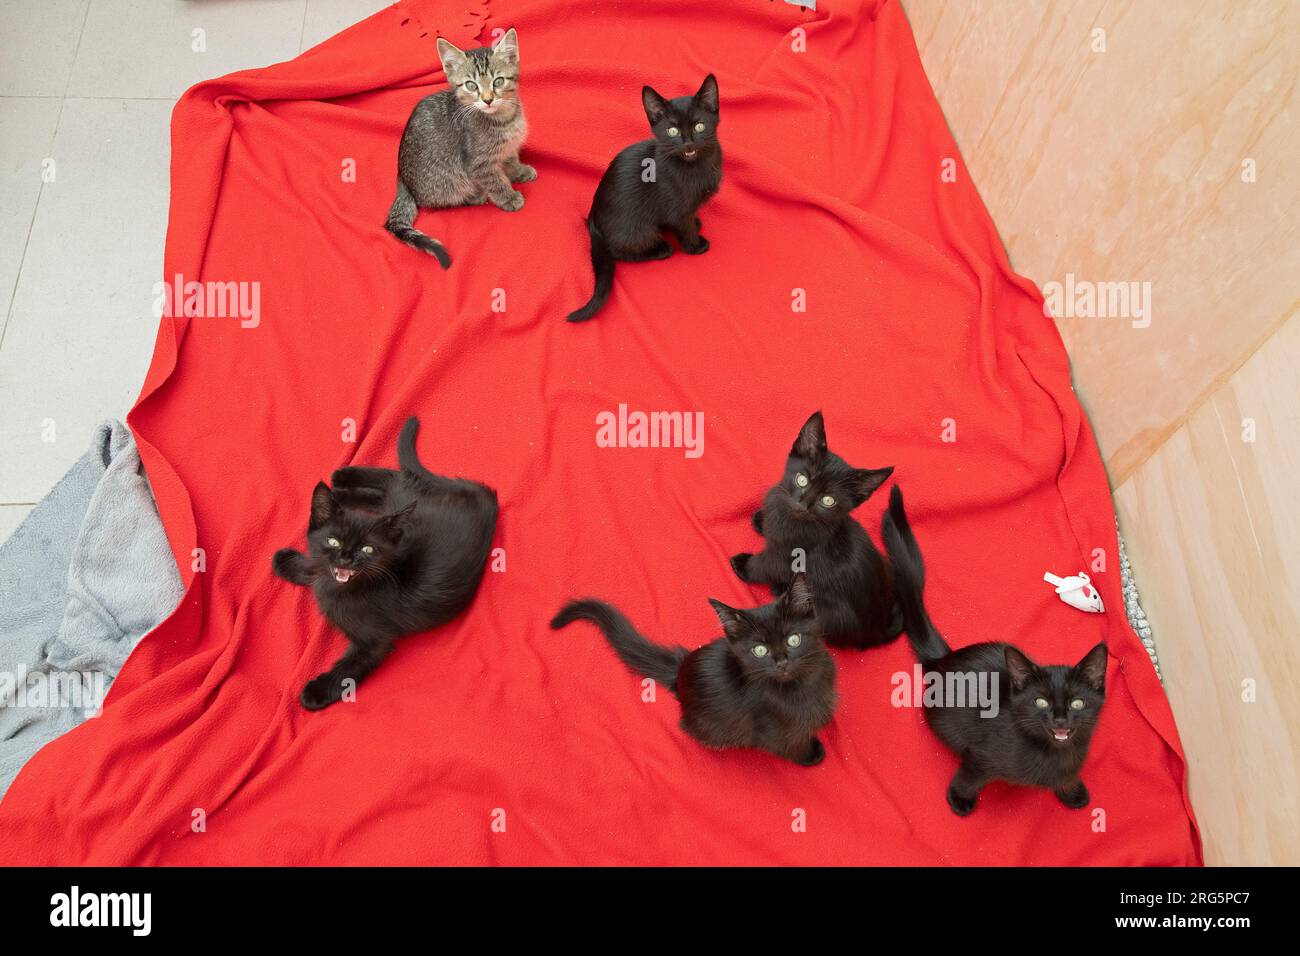 Six nine weeks old kittens sitting on blanket looking into camera, Germany Stock Photo